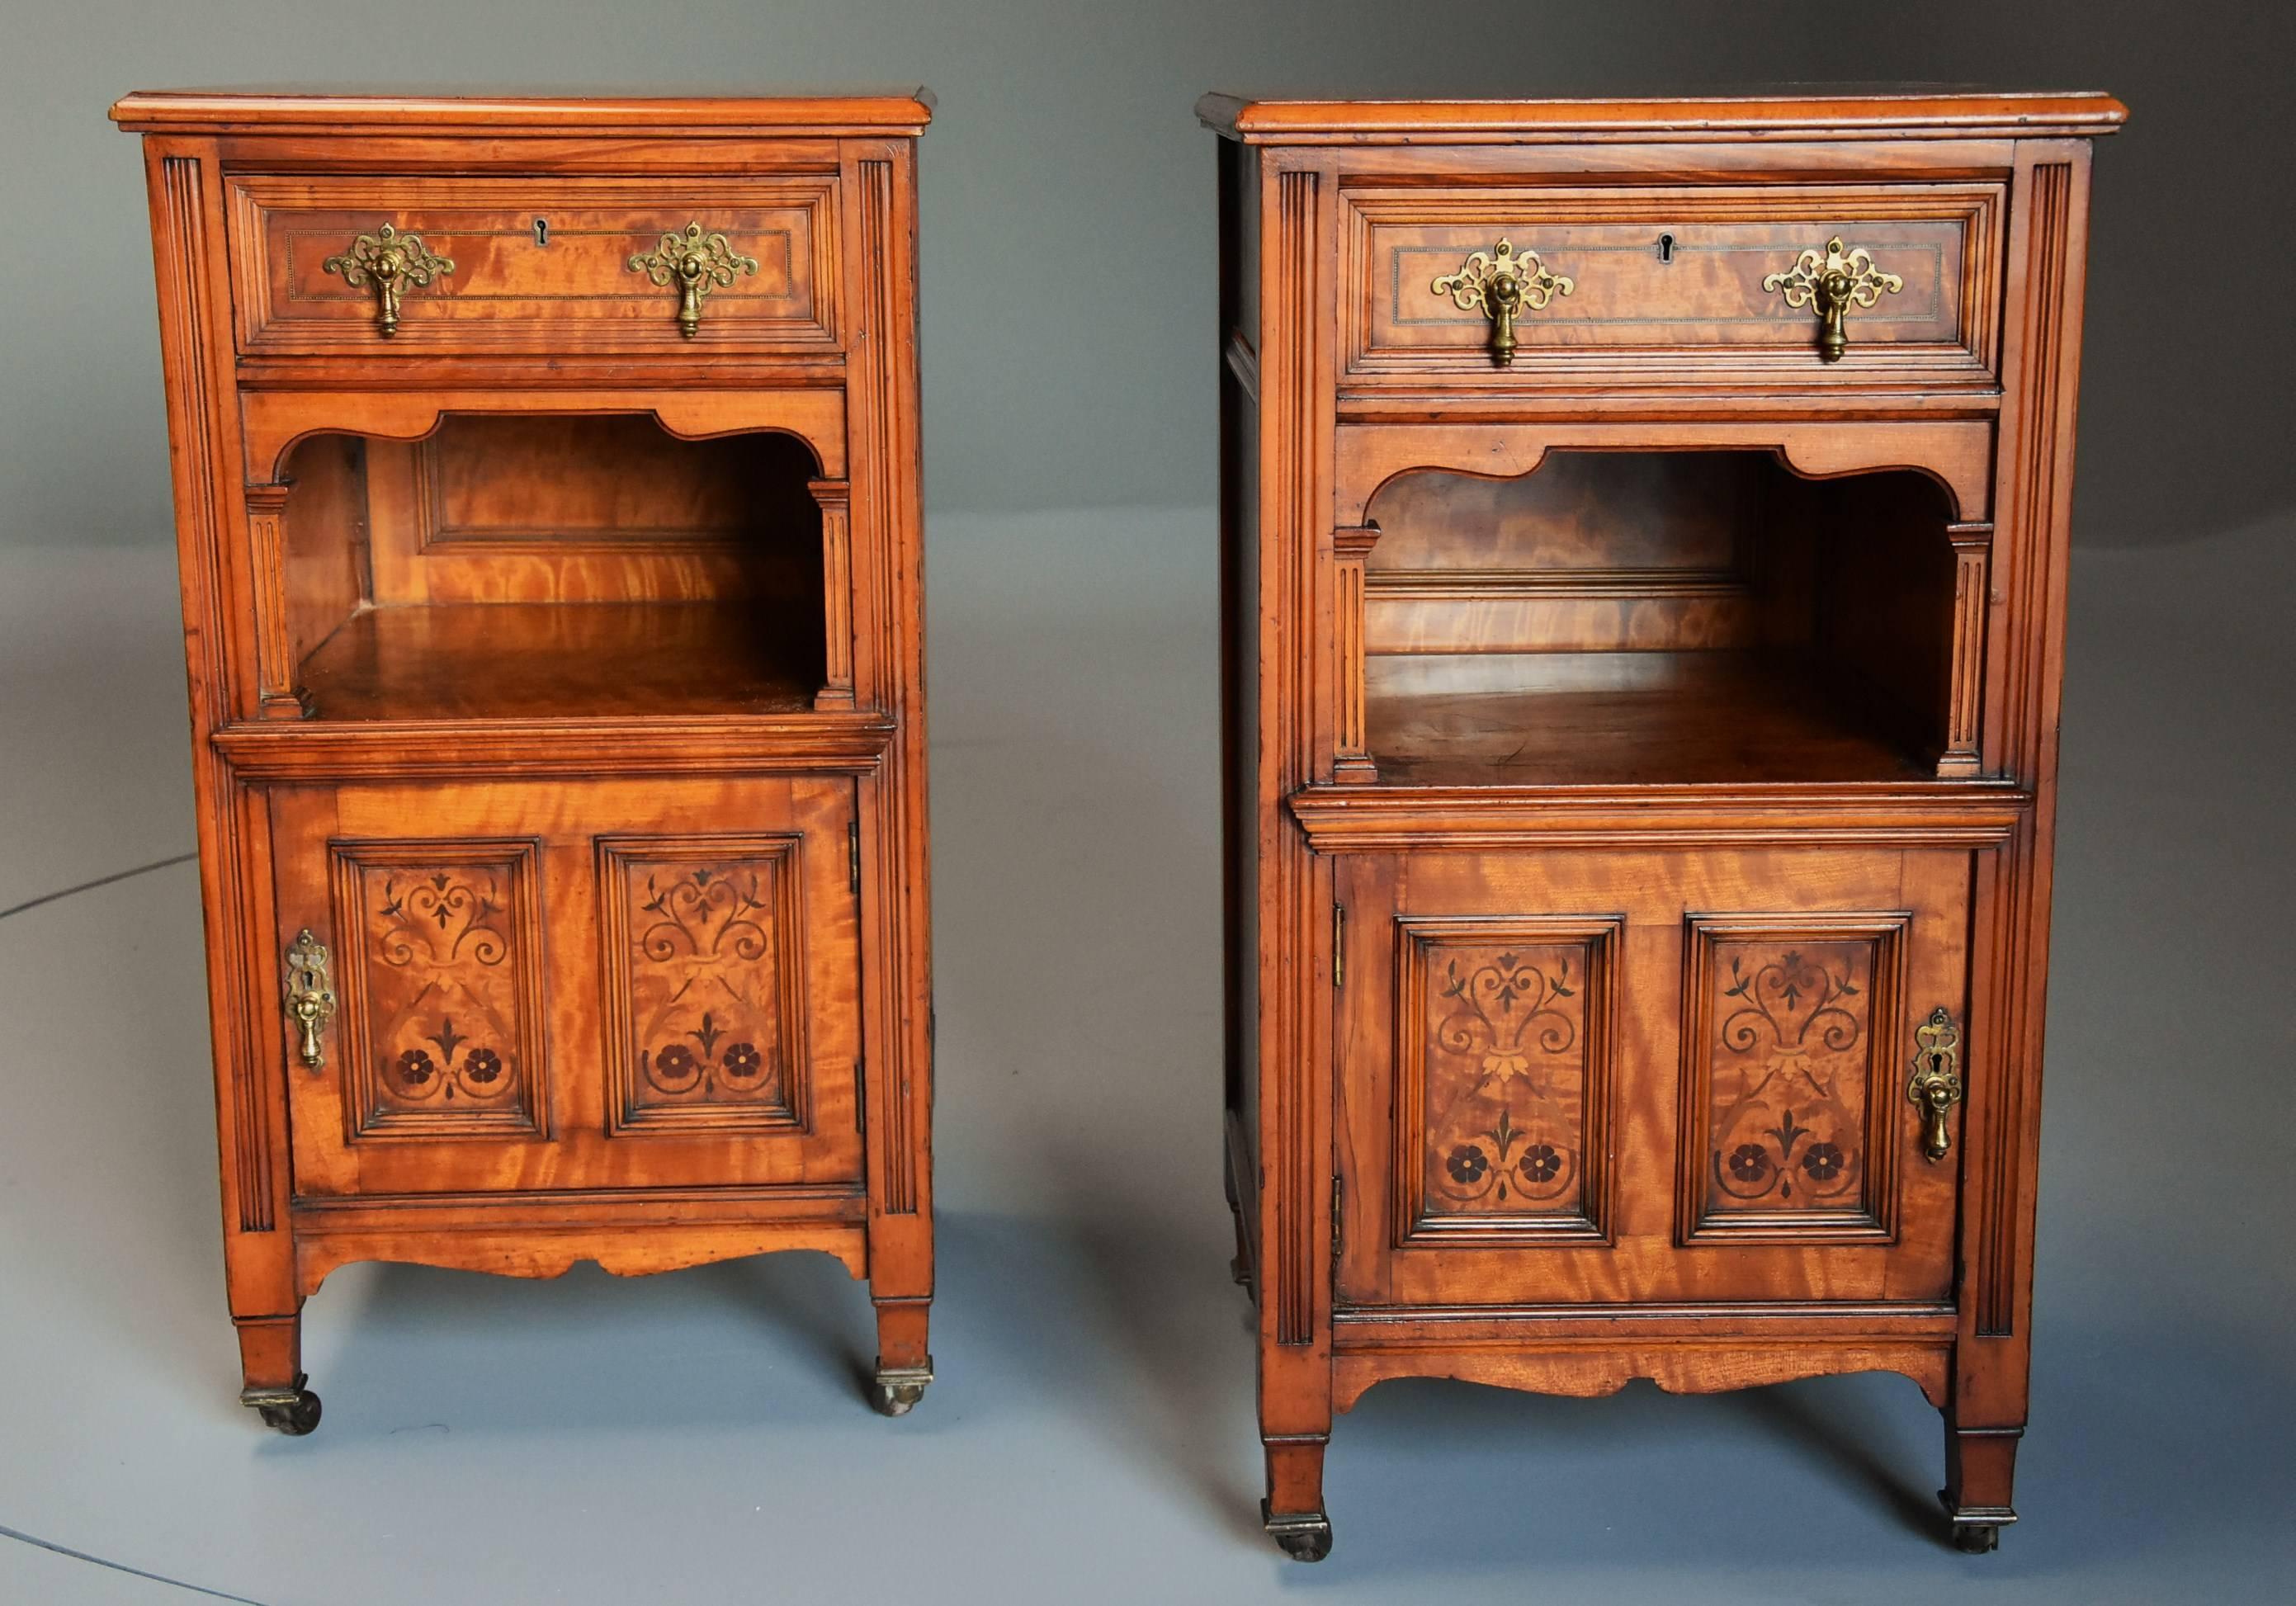 English Pair of Late 19th Century Satin Birch Bedside Cabinets with Aesthetic Influence